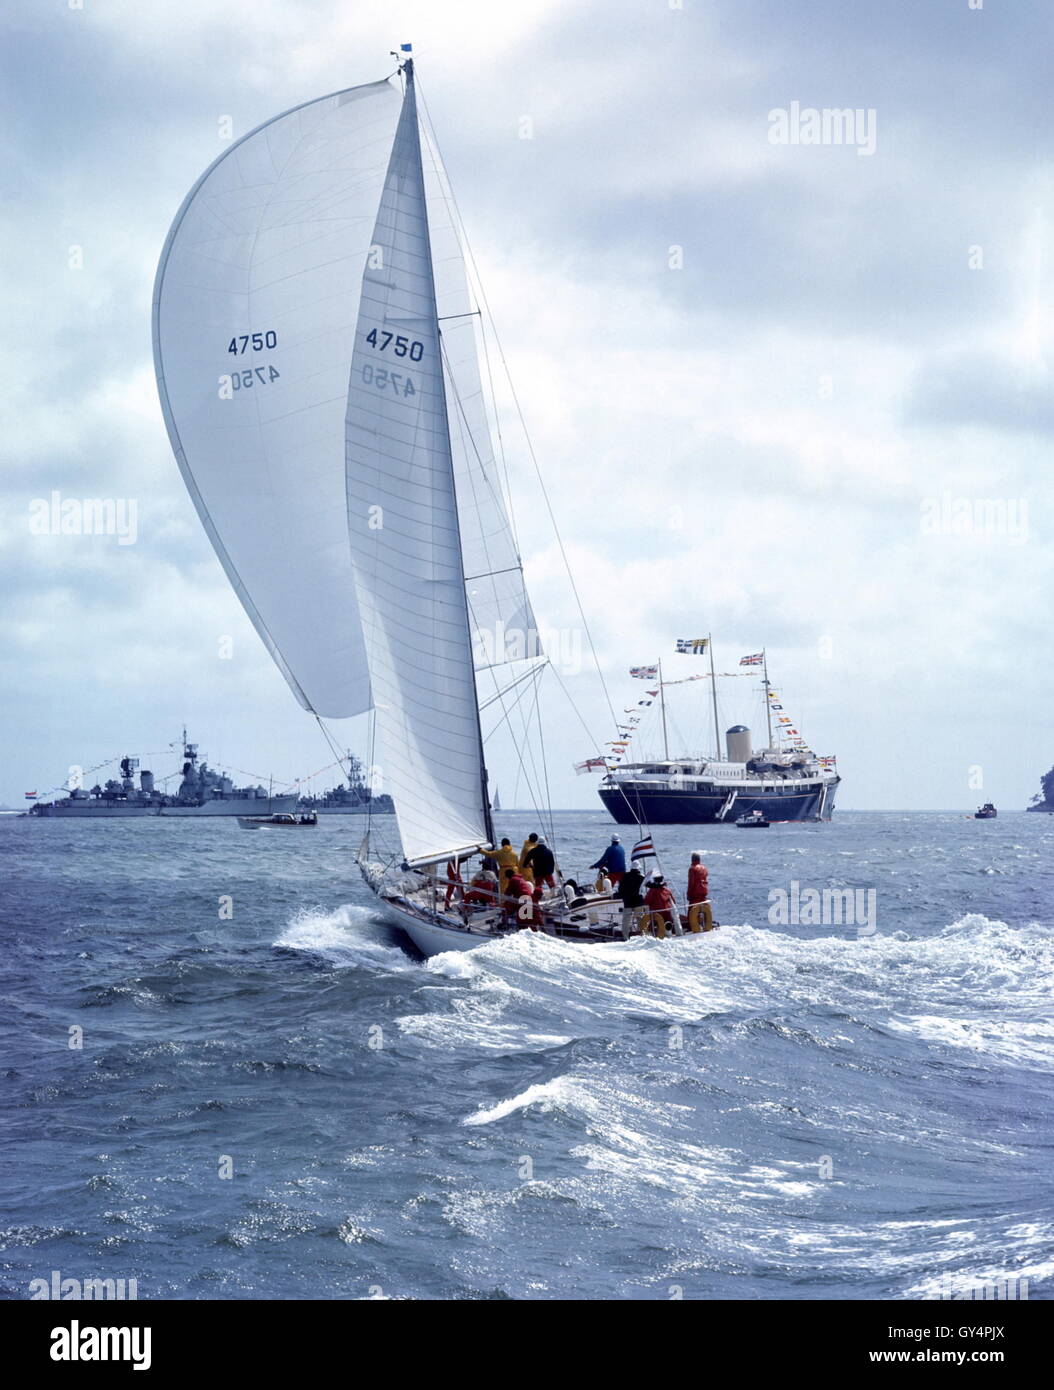 AJAX NEWS PHOTOS. 1971. SOLENT, ENGLAND. - ADMIRAL'S CUP - AMERICAN ENTRY YANKEE GIRL POWERS TOWARD COWES ROADS WITH THE ROYAL YACHT HMRY BRITANNIA AND NAVAL GUARDSHIPS IN BACKGROUND. PHOTO:JONATHAN EASTLAND/AJAX REF:C7105D6 Stock Photo